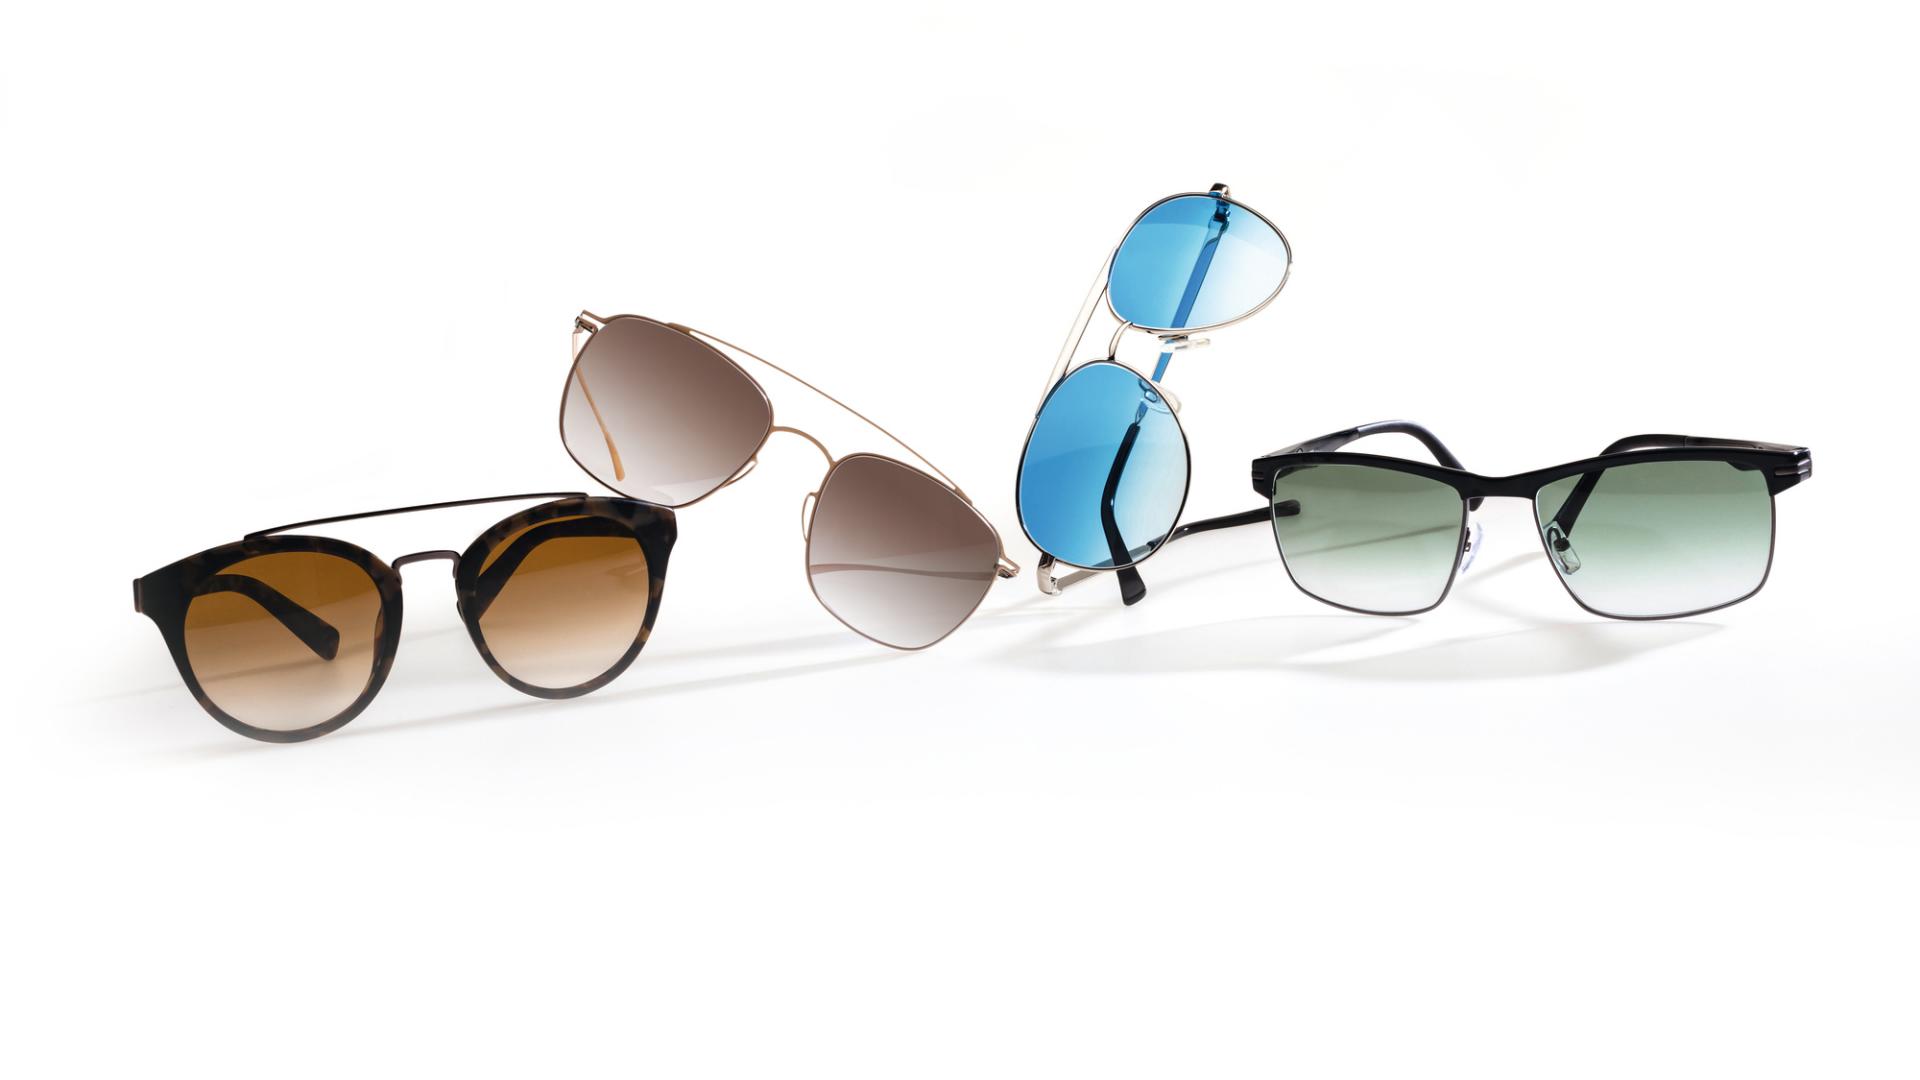 With ZEISS Sun Lenses it will never again be too bright or too dark